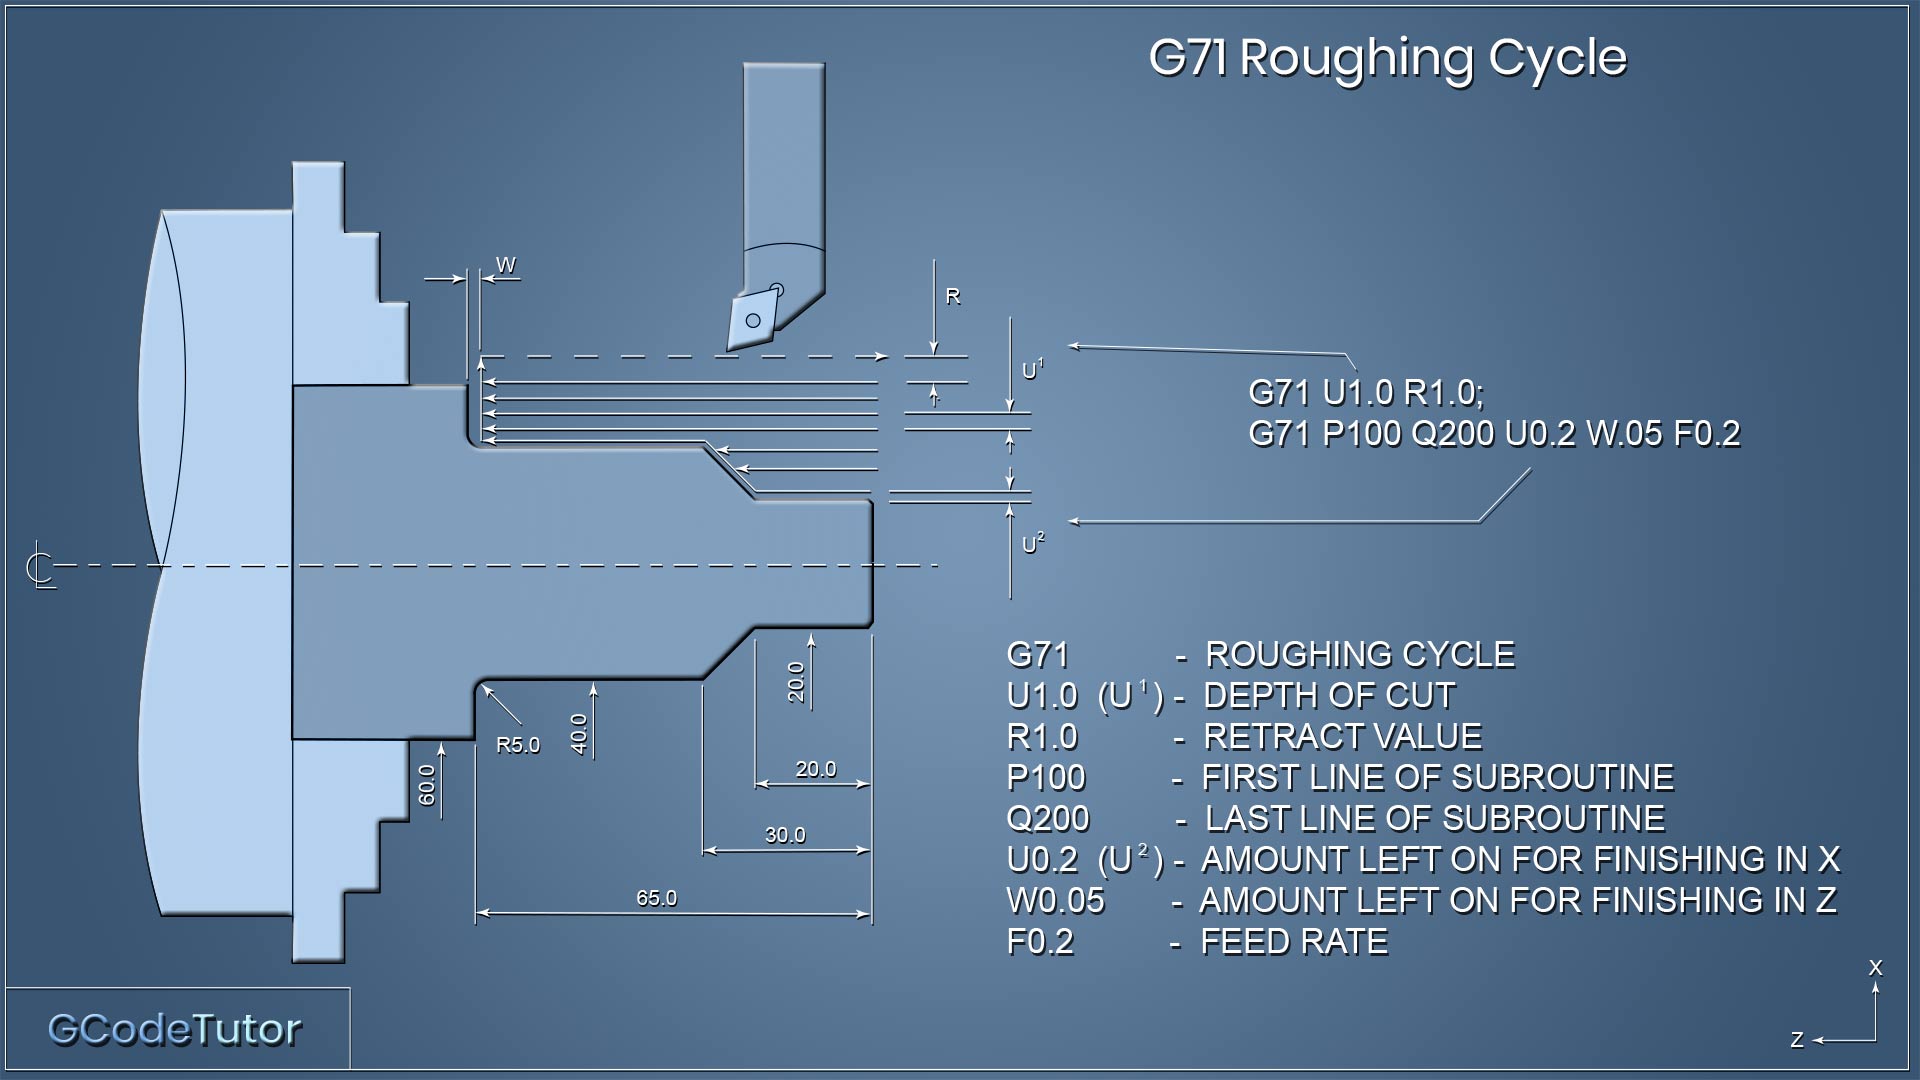 G71 roughing cycle